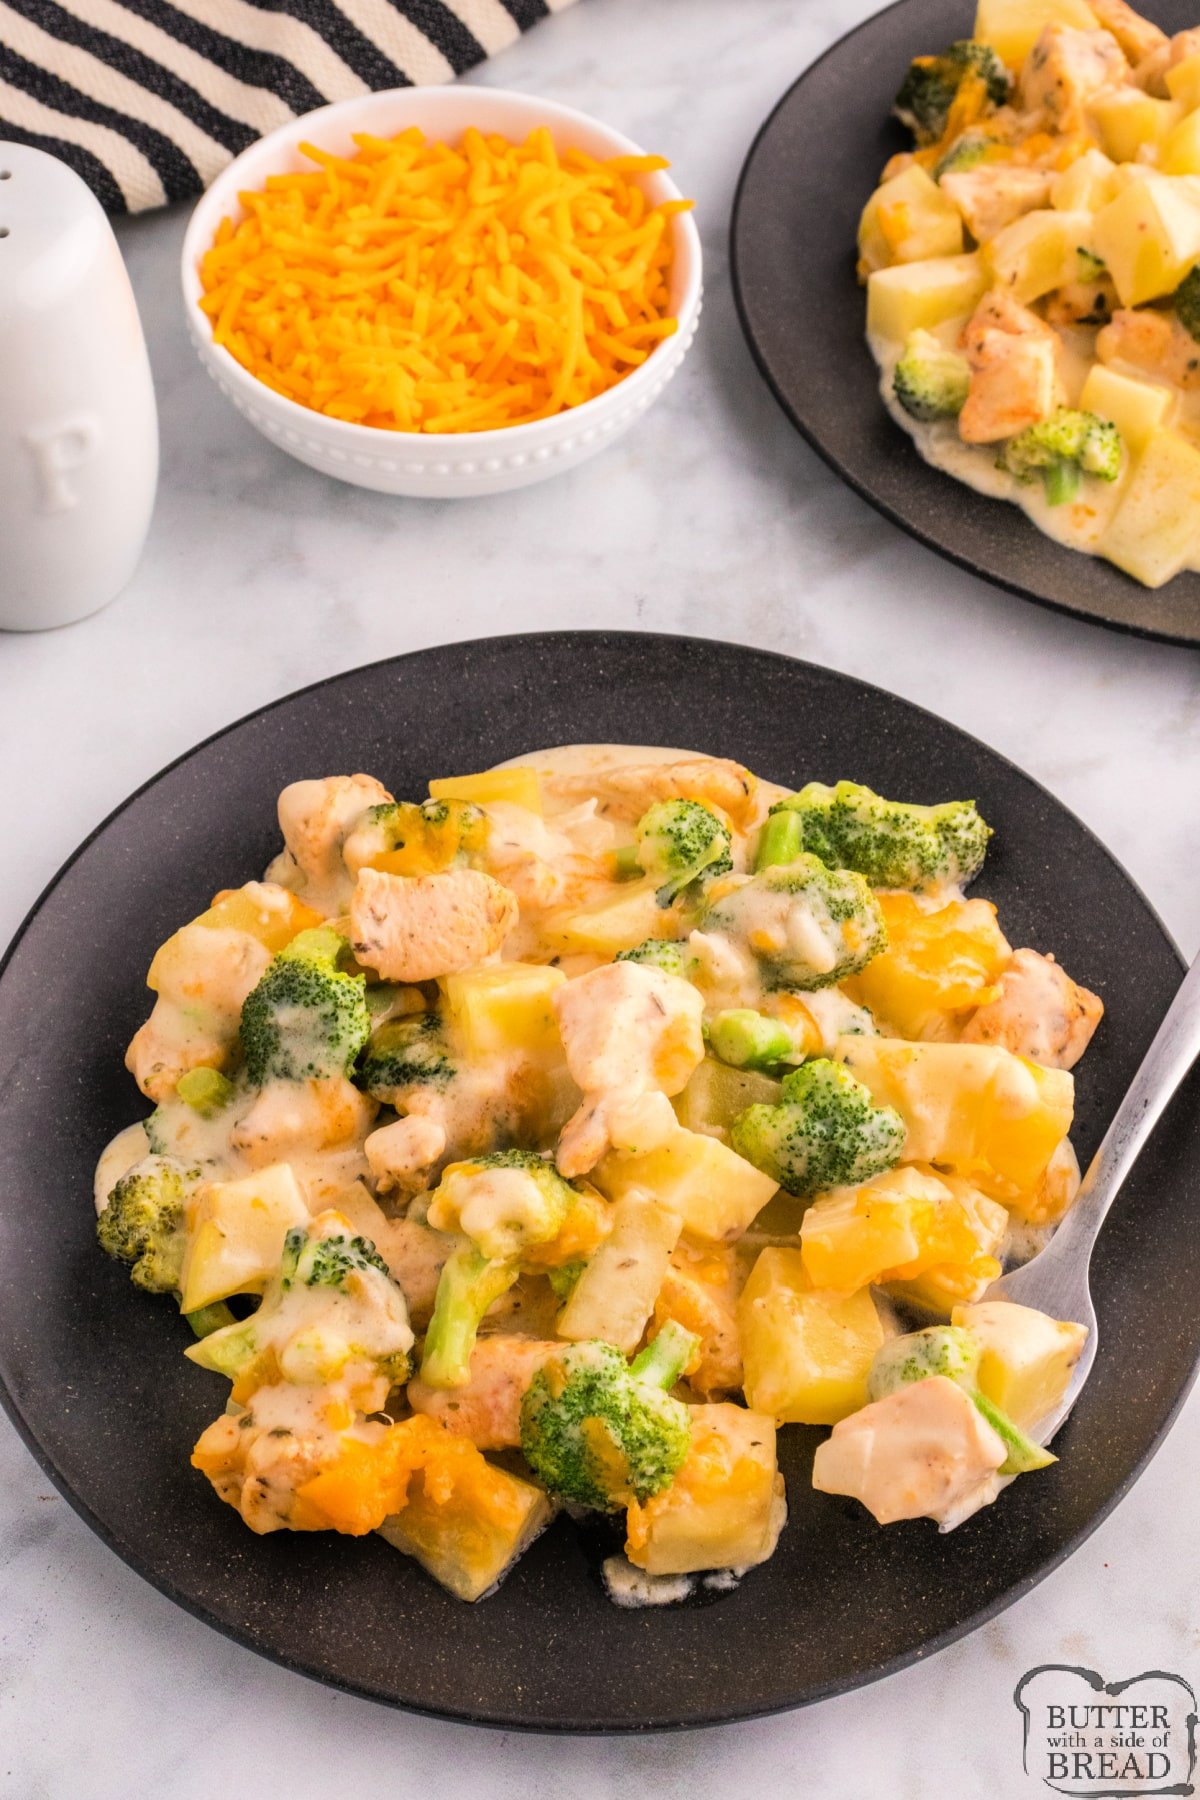 Casserole made with potatoes, cheese, broccoli, and cheese. 